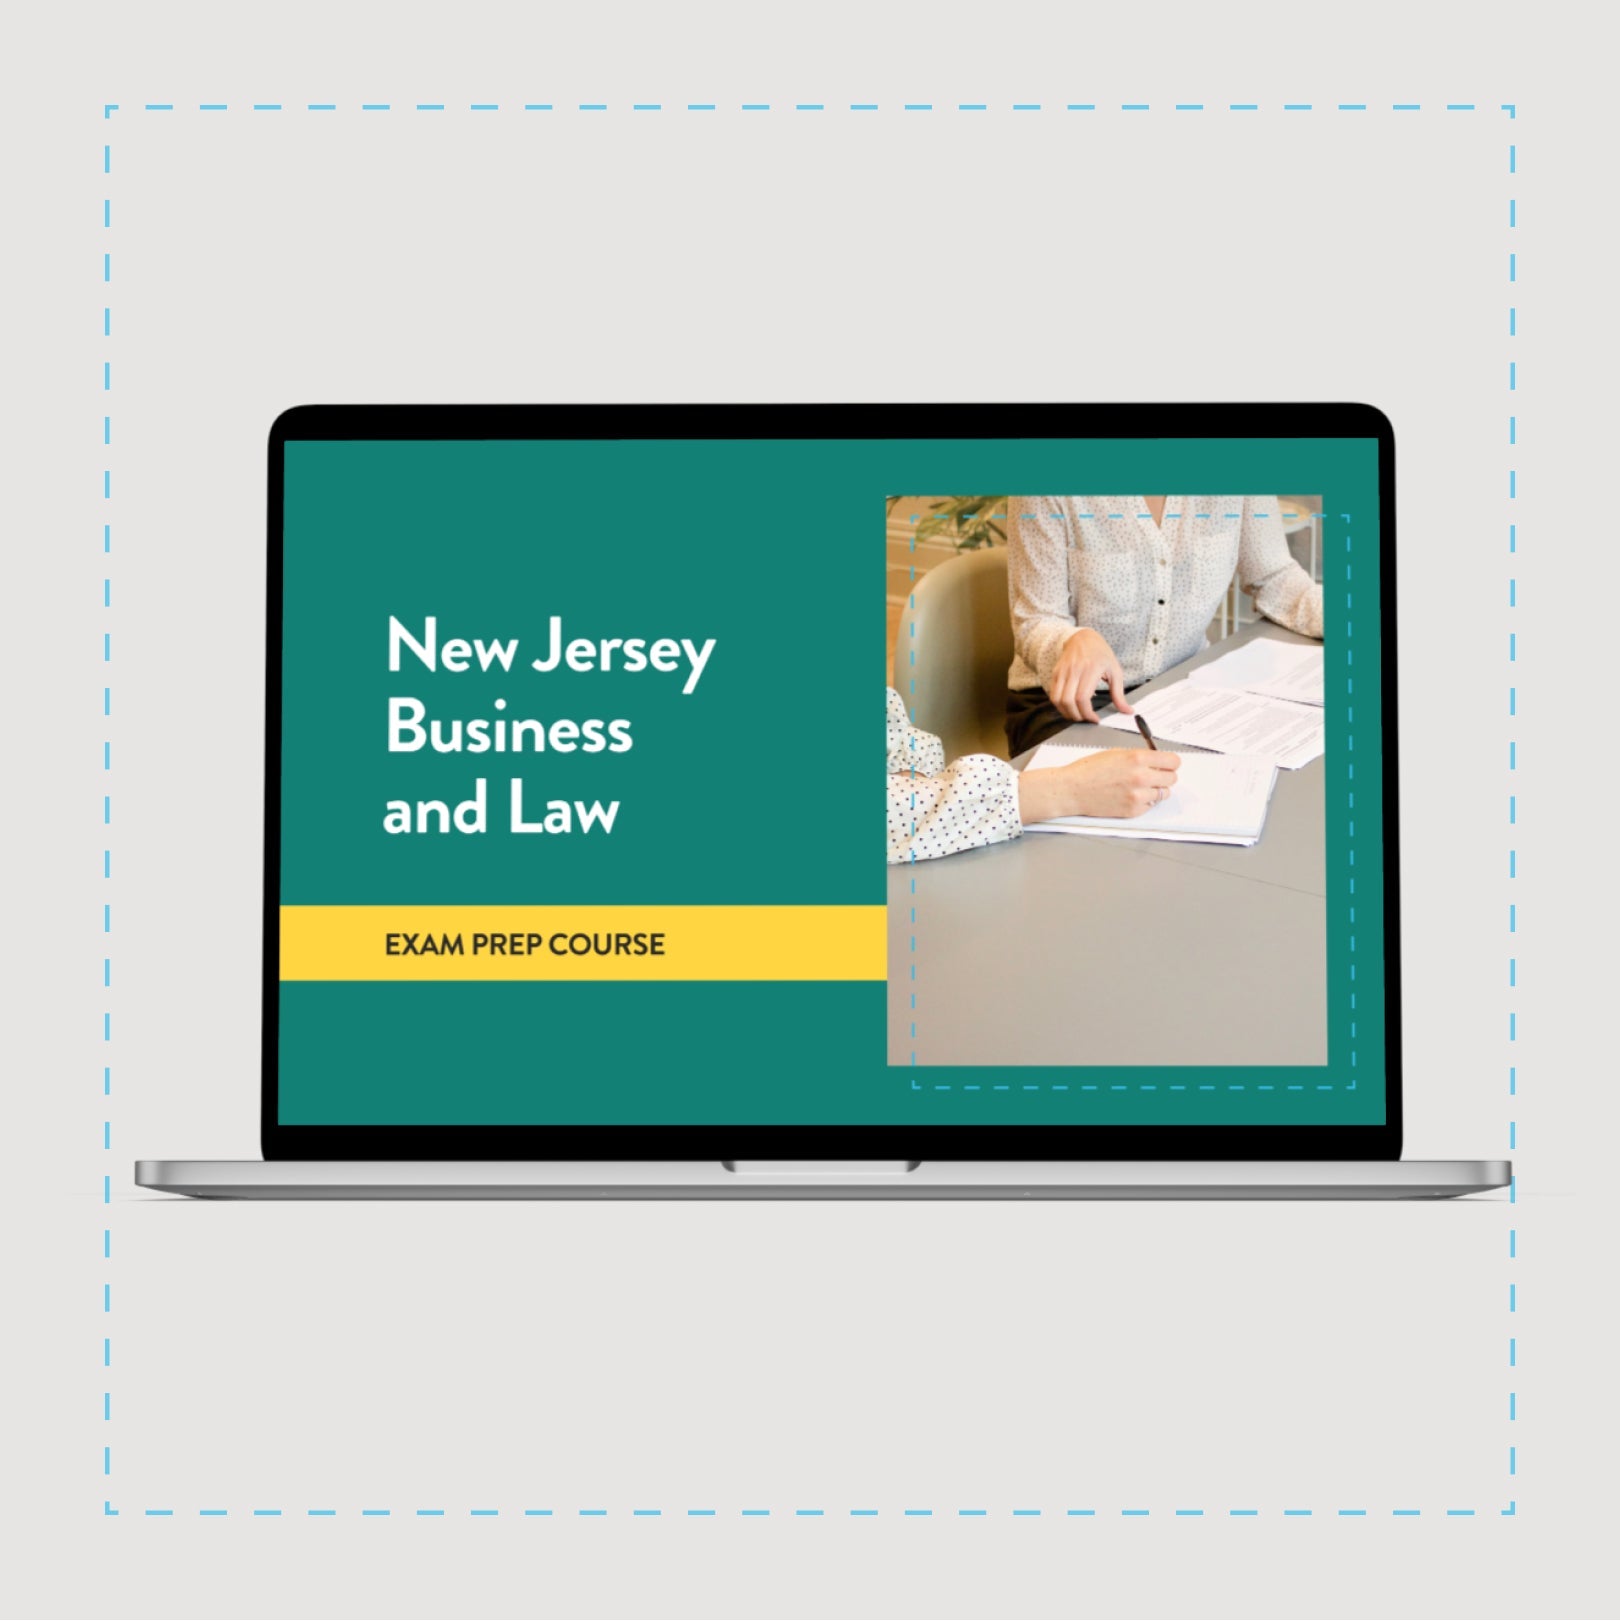 New Jersey Business and Law Exam Prep Course